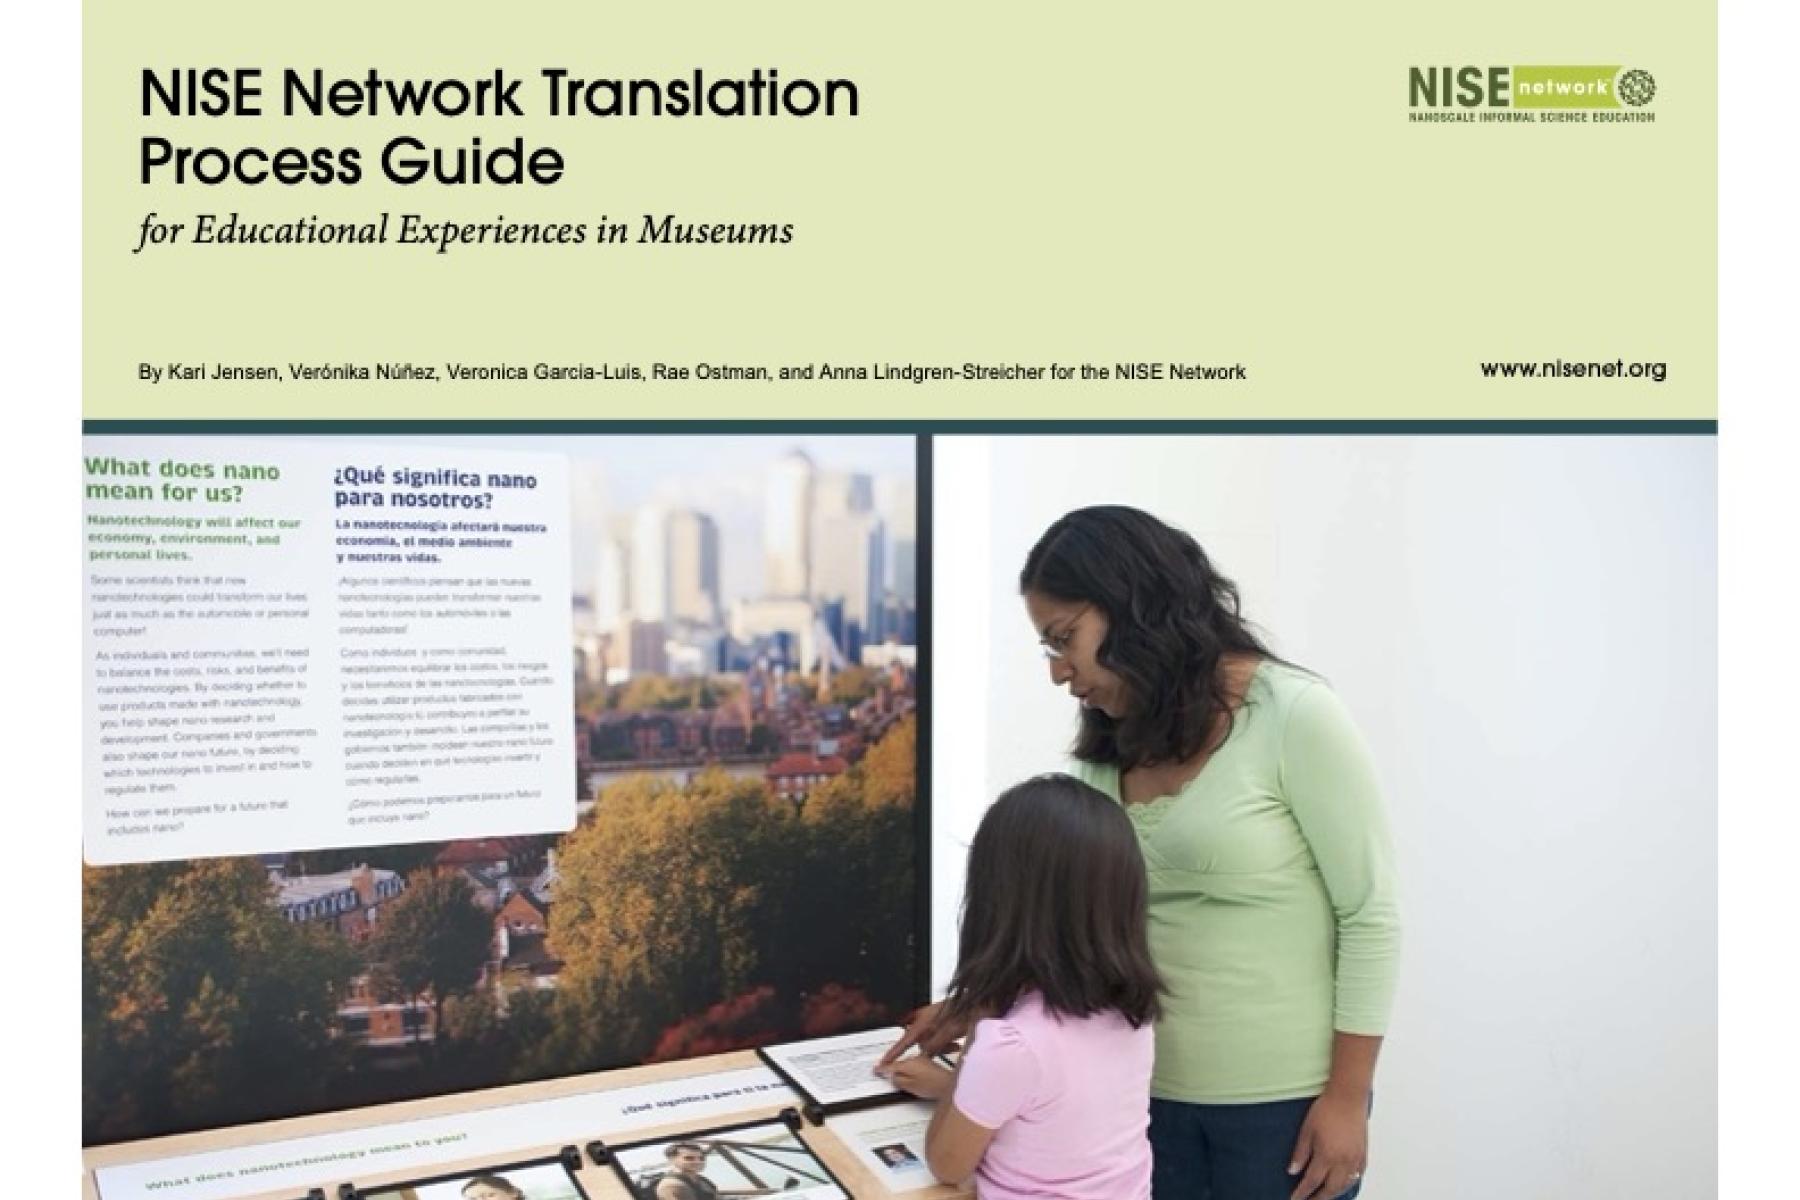 Translation Process Guide cover showing Latino mother and daughter having conversation about an exhibit